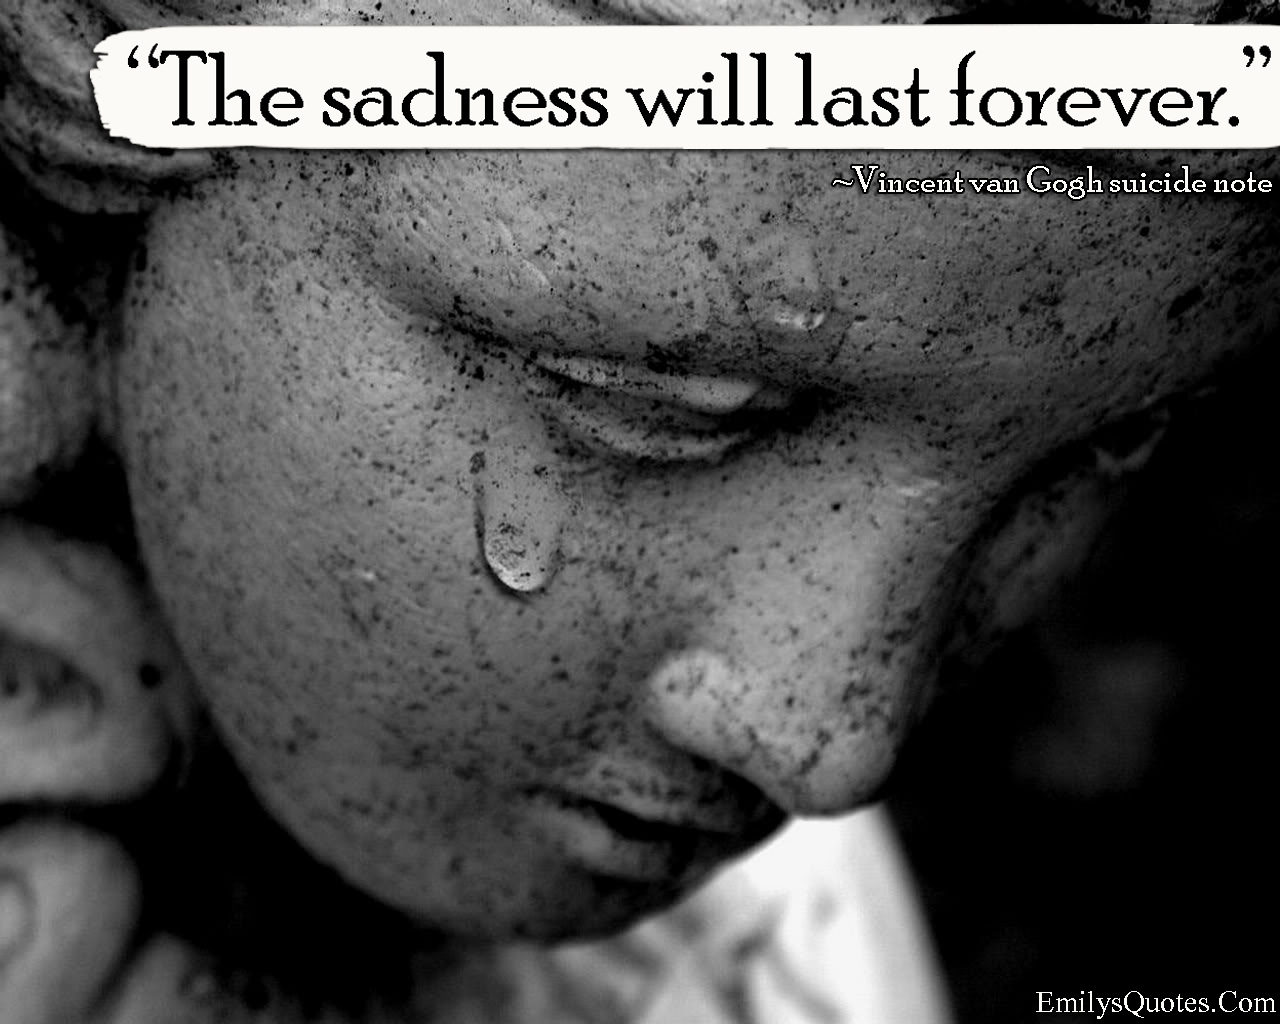 The sadness will last forever